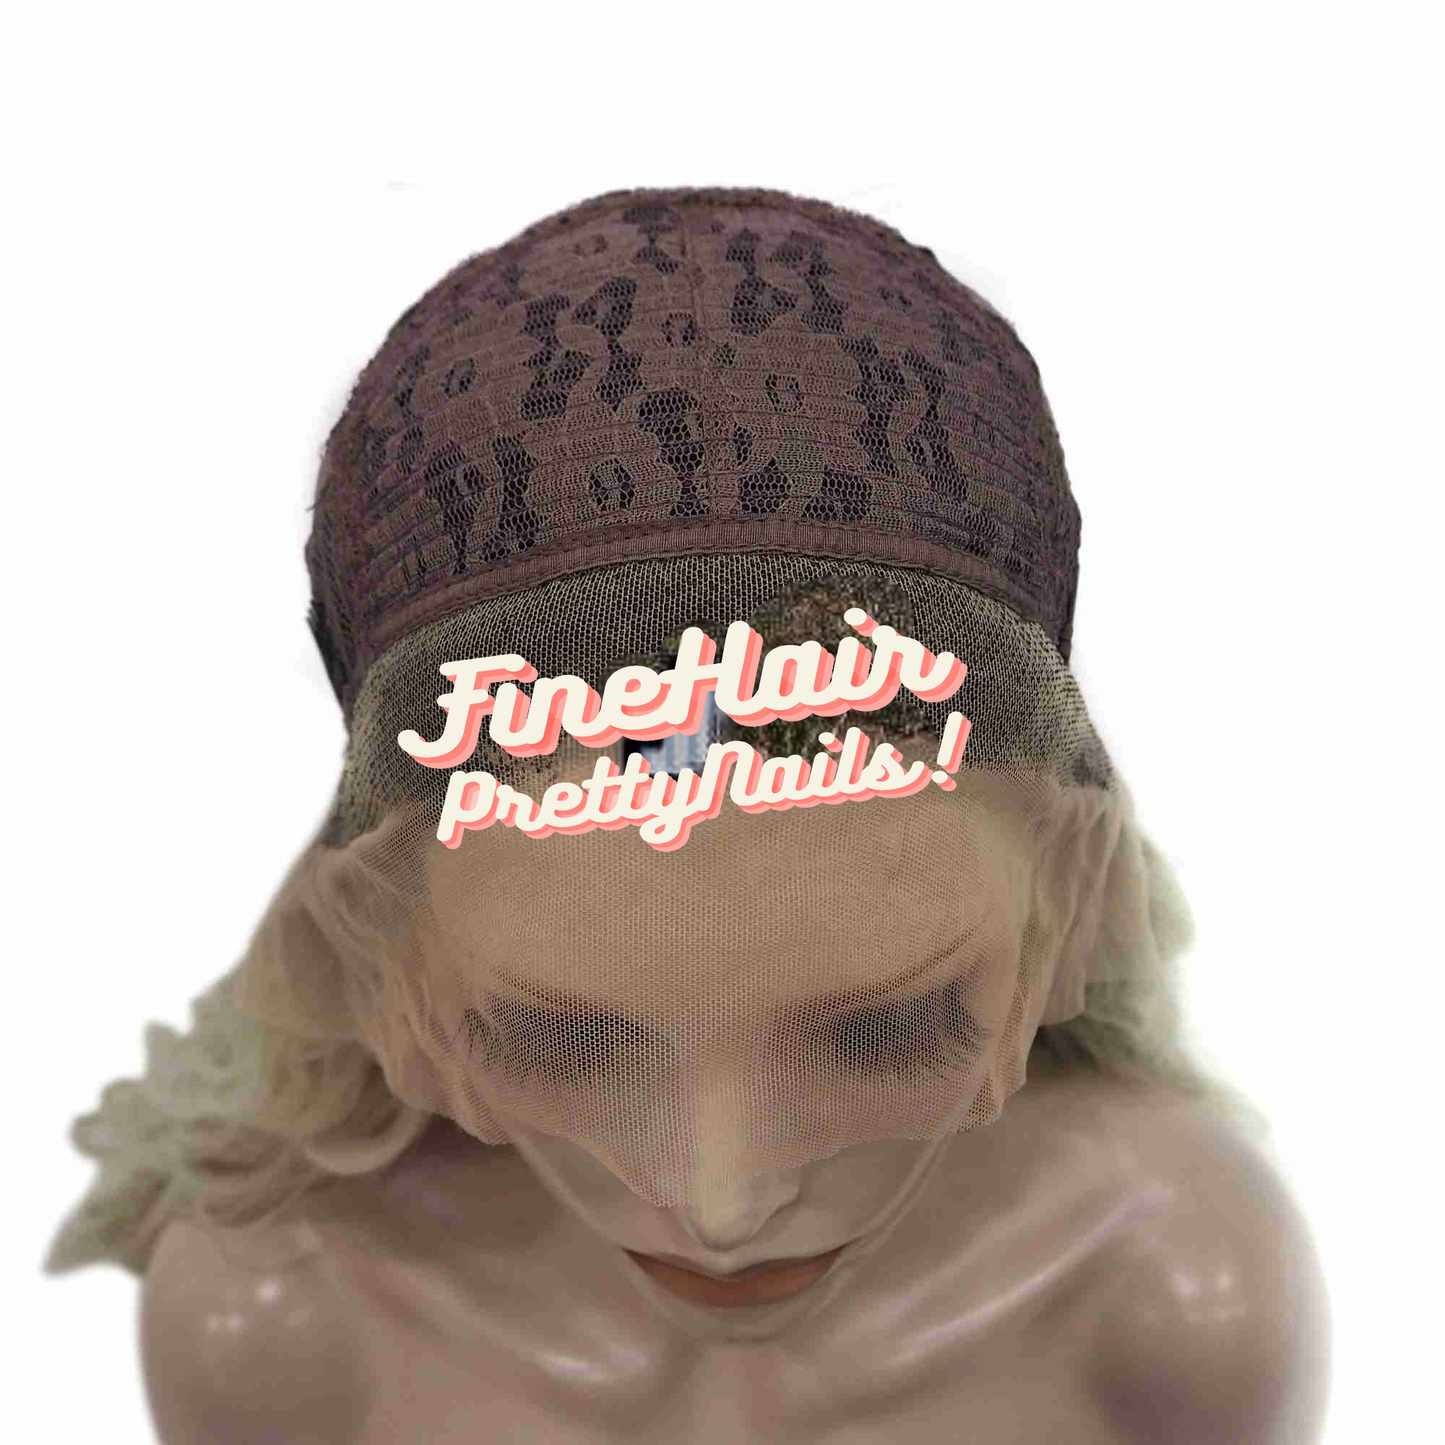 inside lace view of blonde wavy wig with platinum blond highlights on mannequin head